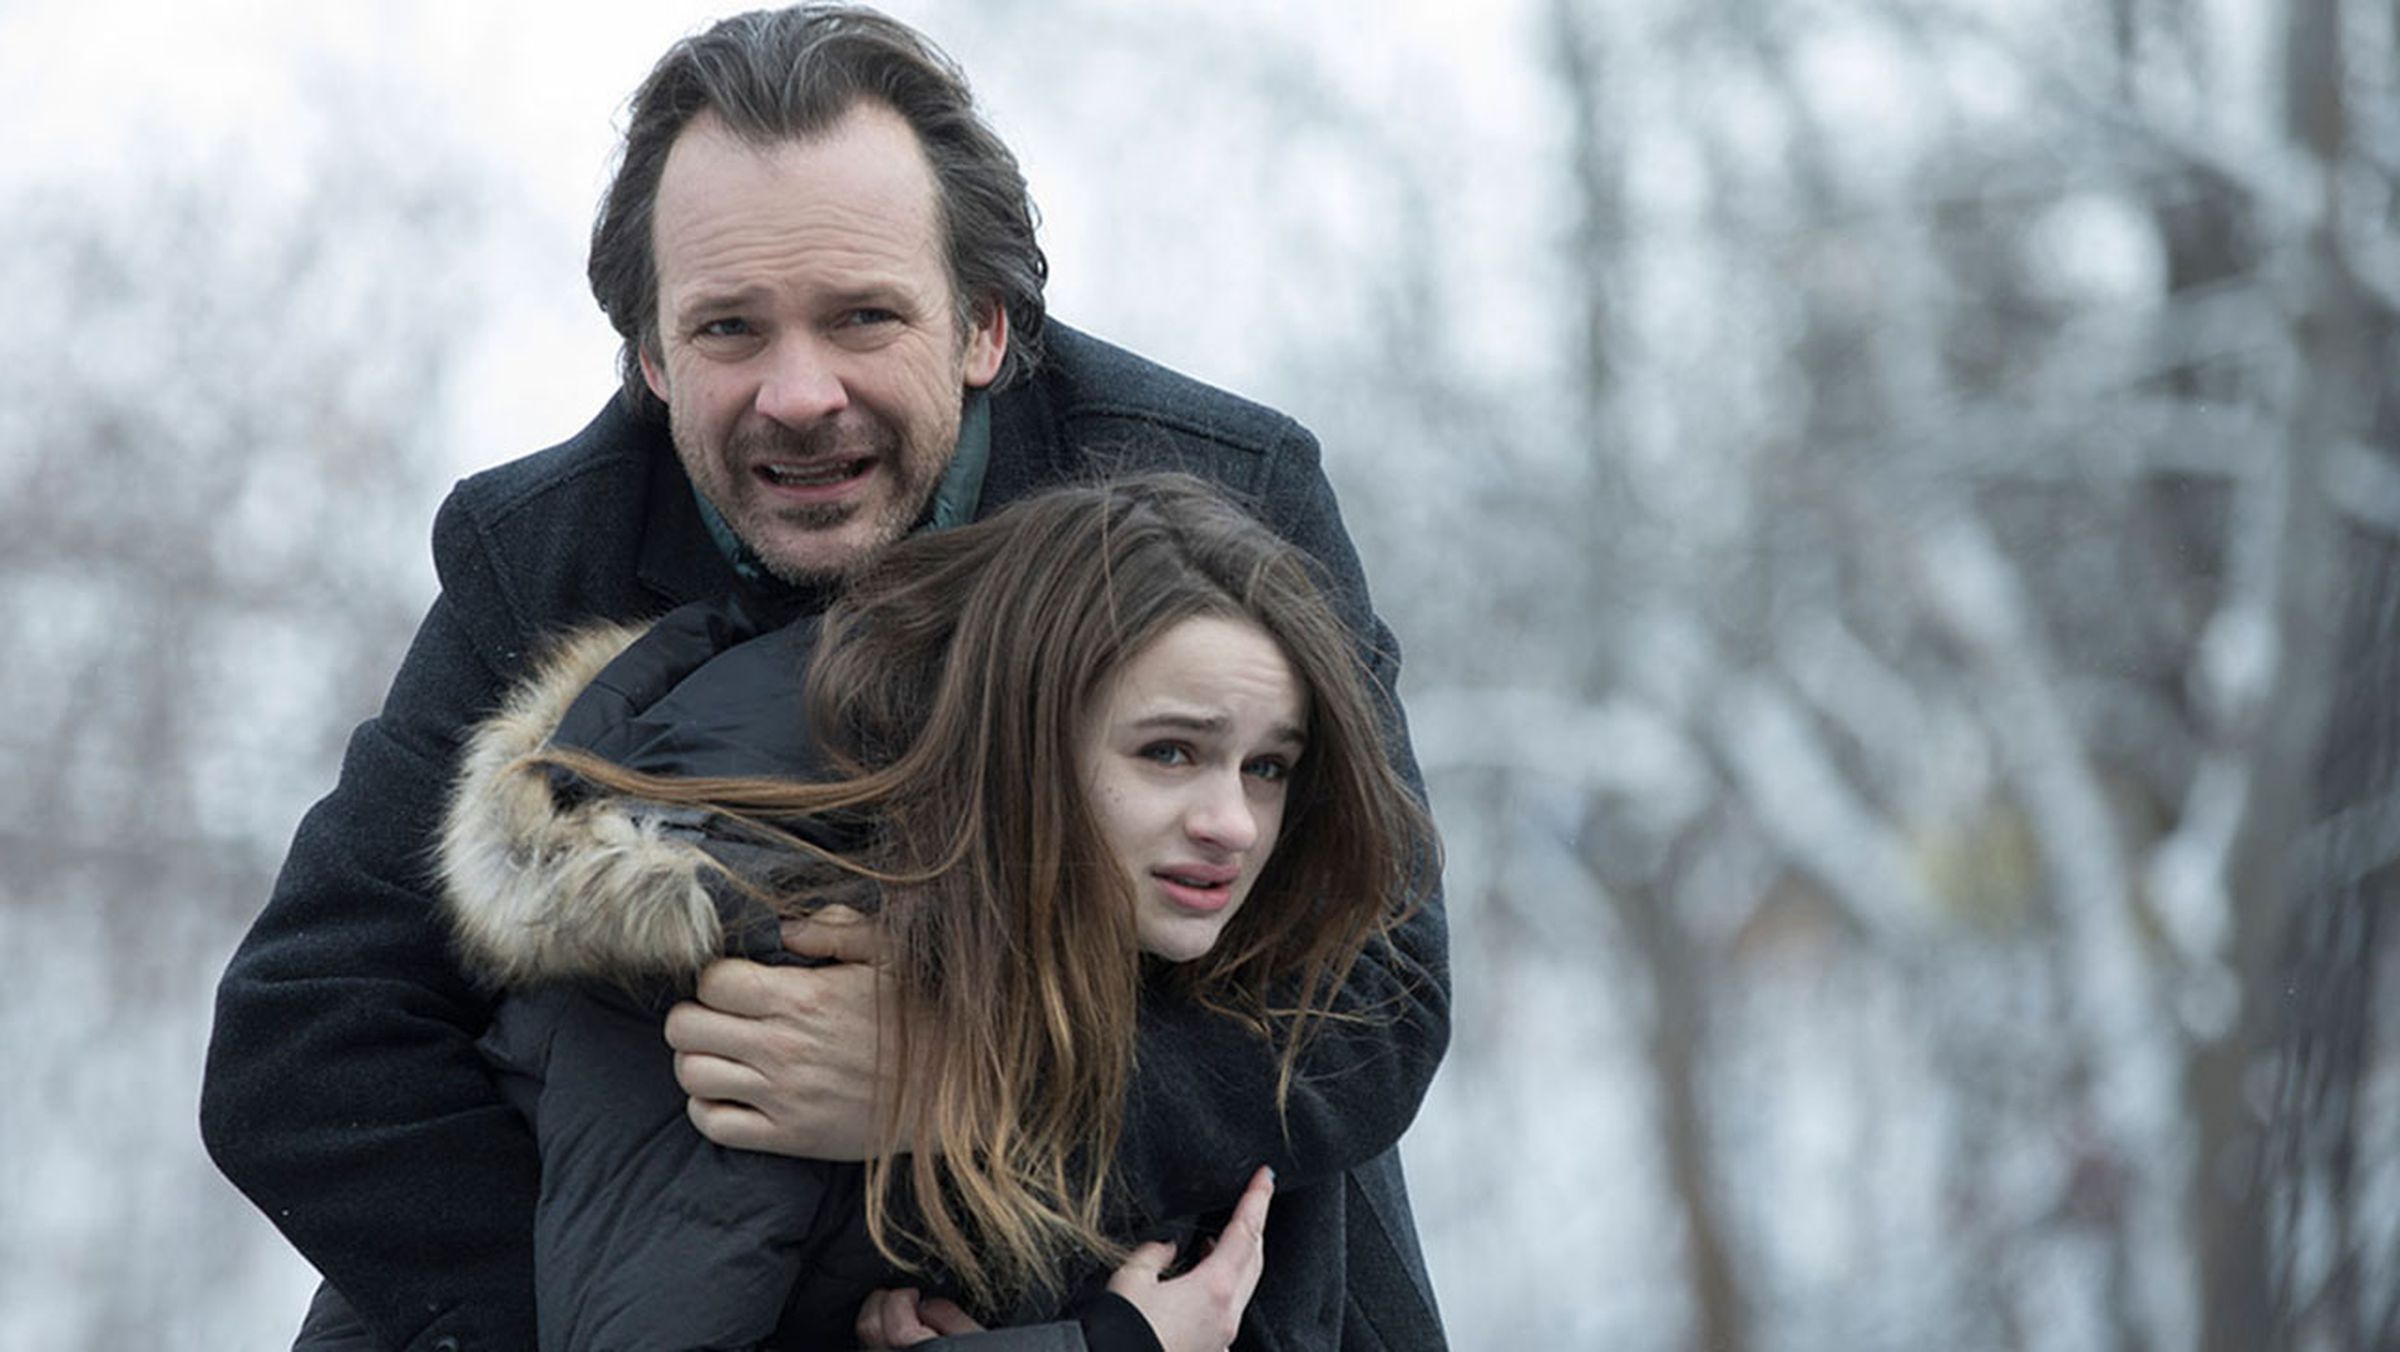 Peter Sarsgaard and Joey King in The Lie.